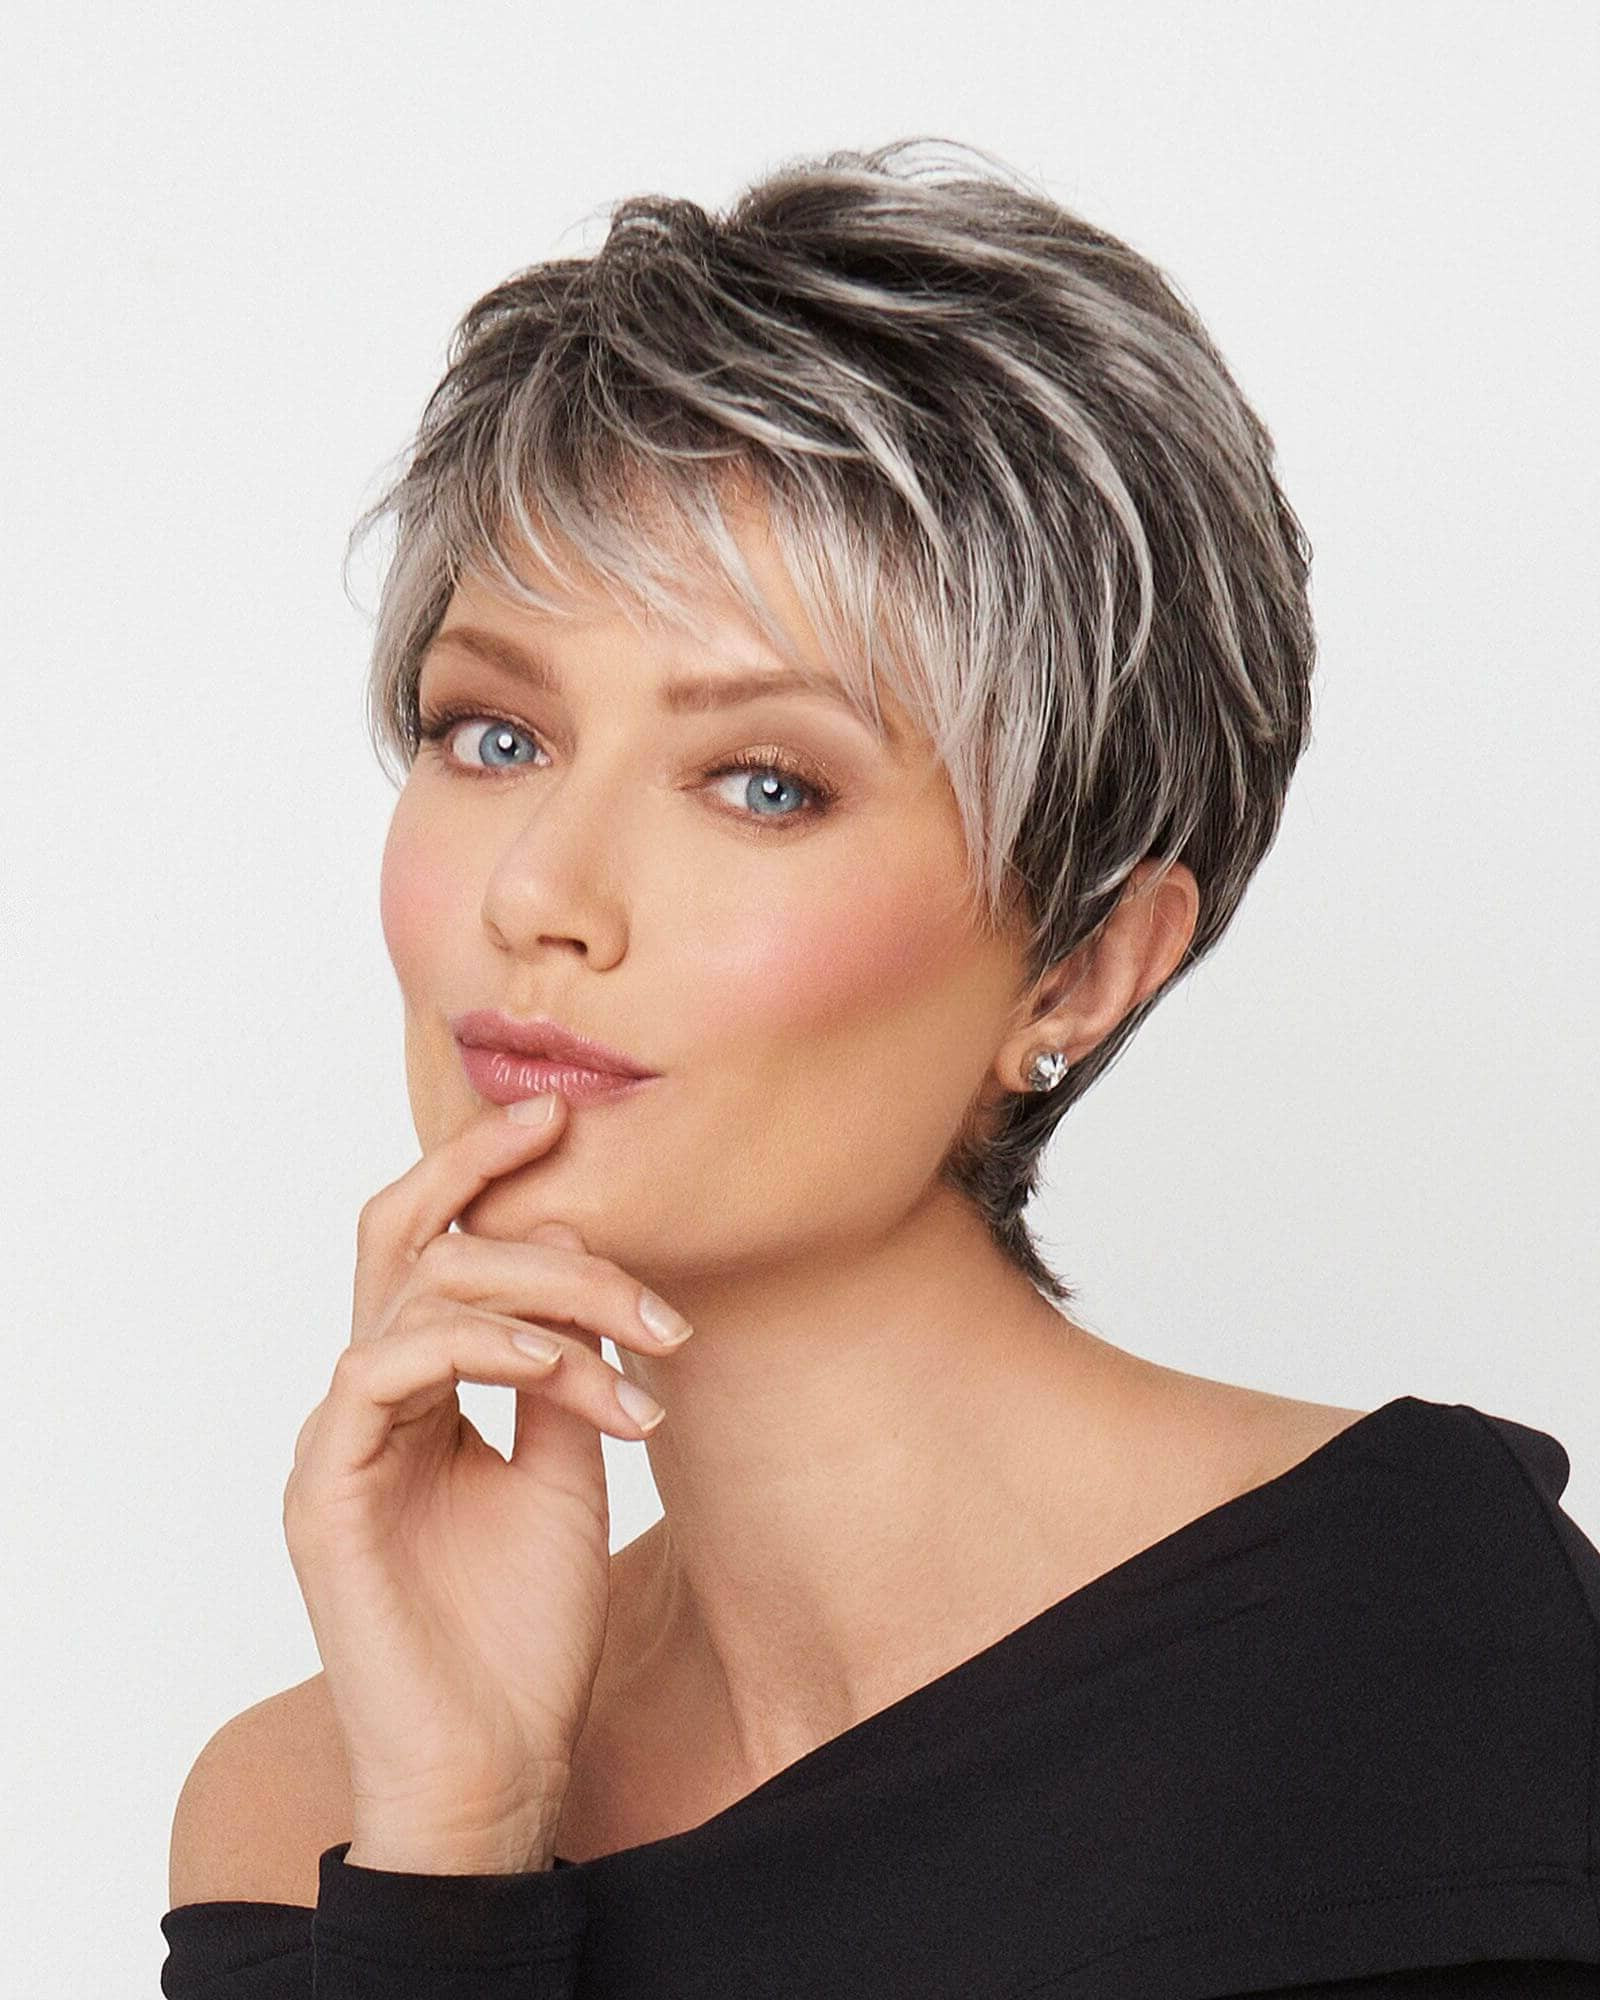 Undercut Pixie Hairstyle
 20 Best of Pixie Undercut Hairstyles For Women Over 50